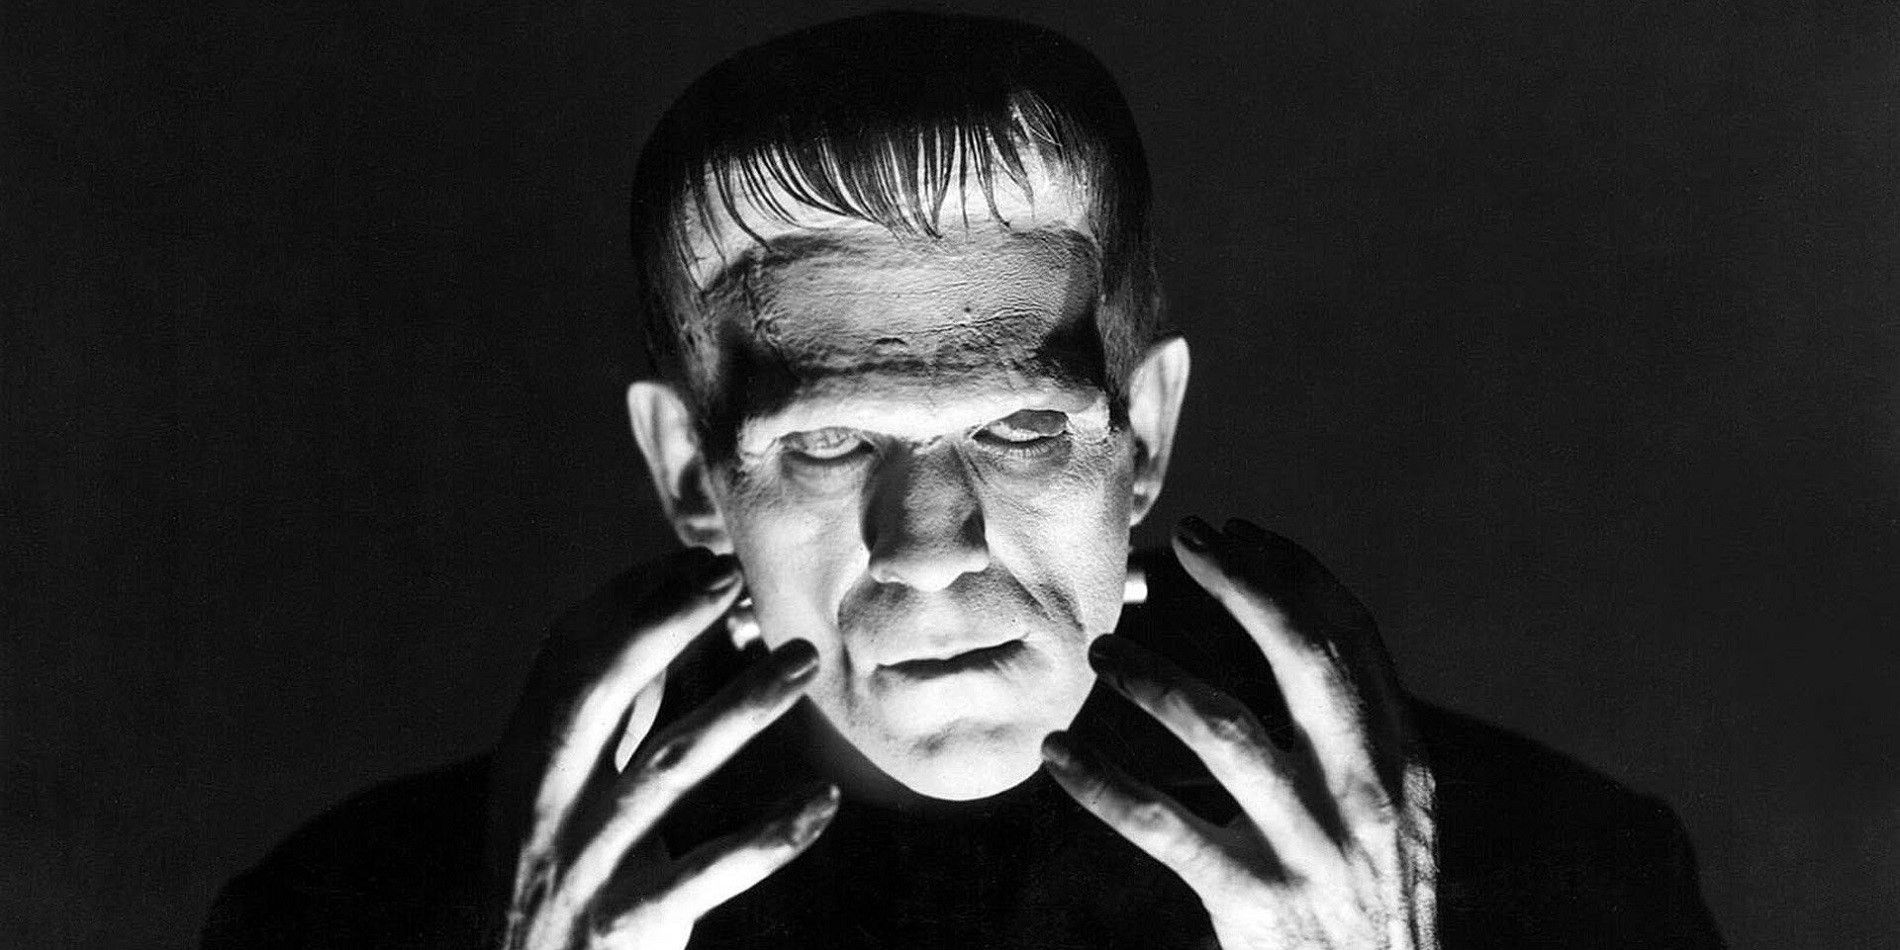 15 Black And White Horror Movies That Are Scary As Hell